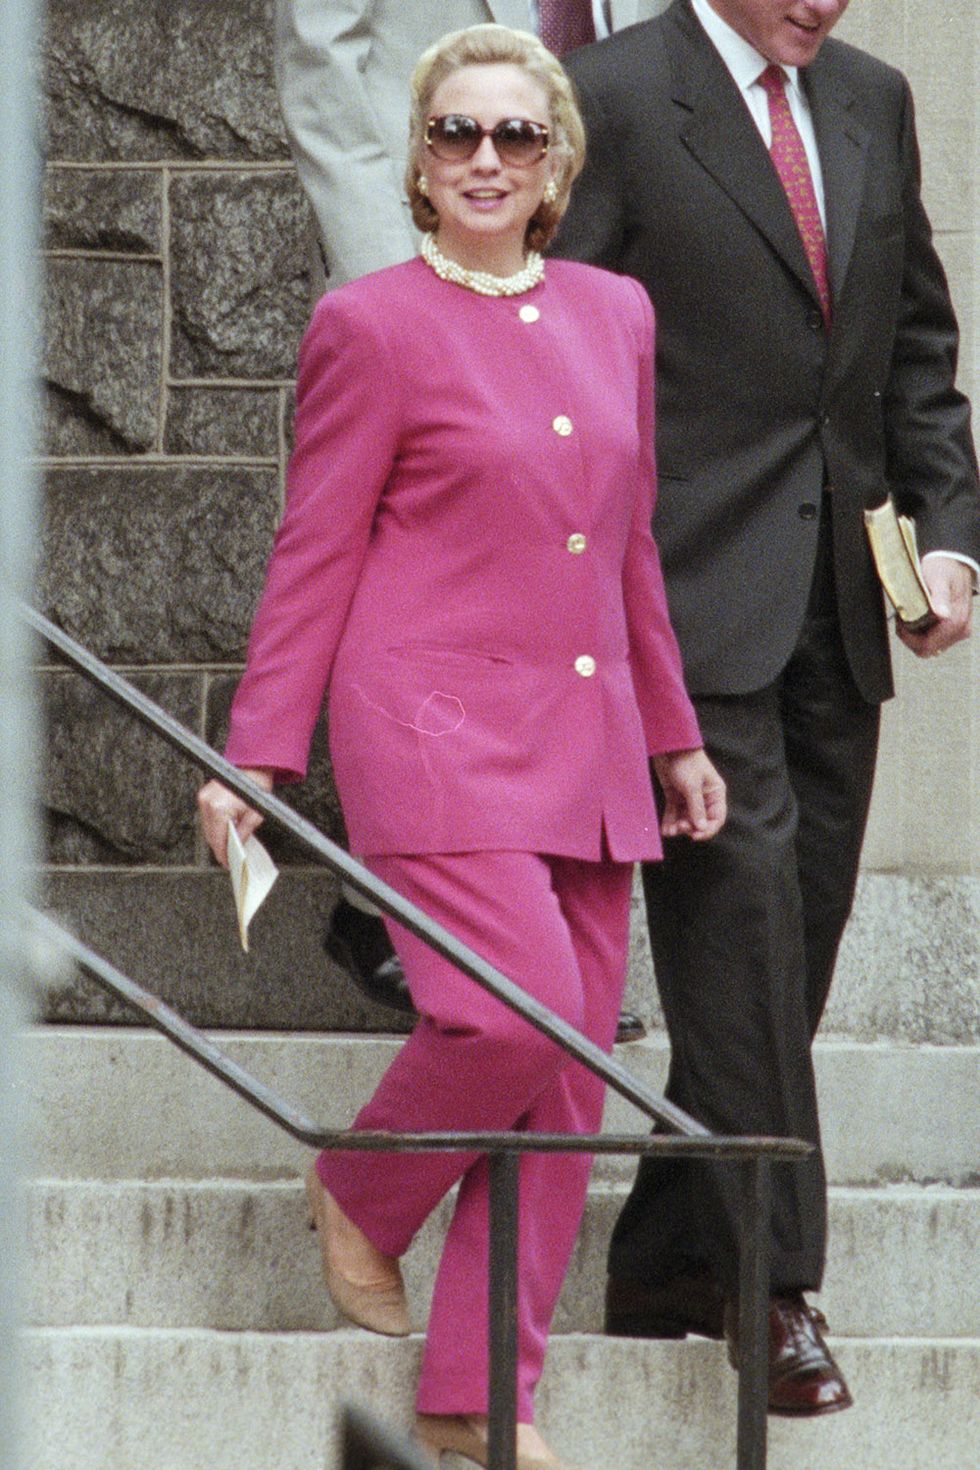 US Election 2020: The politics of the pink pantsuit